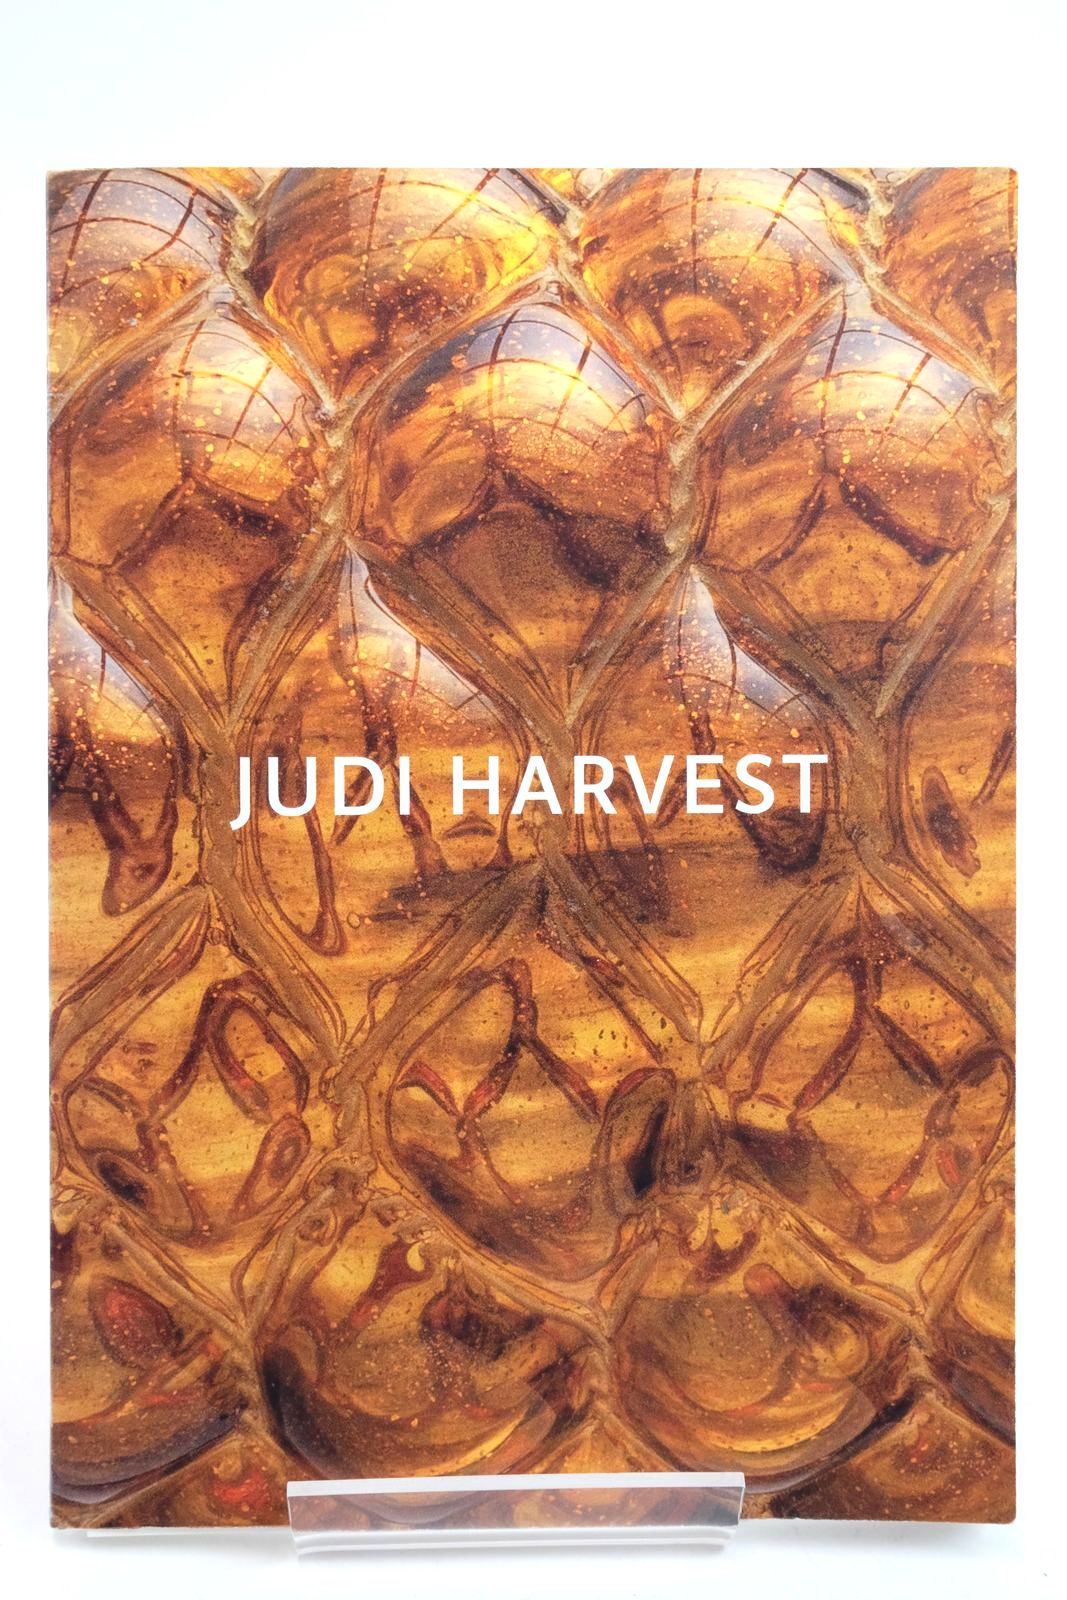 Photo of DENATURED HONEYBEES & MURANO: JUDI HARVEST AND BEES WITHOUT BORDERS written by Vetrocq, Marcia E.
Di Martino, Enzo published by Citta' Di Venezia (STOCK CODE: 2136002)  for sale by Stella & Rose's Books